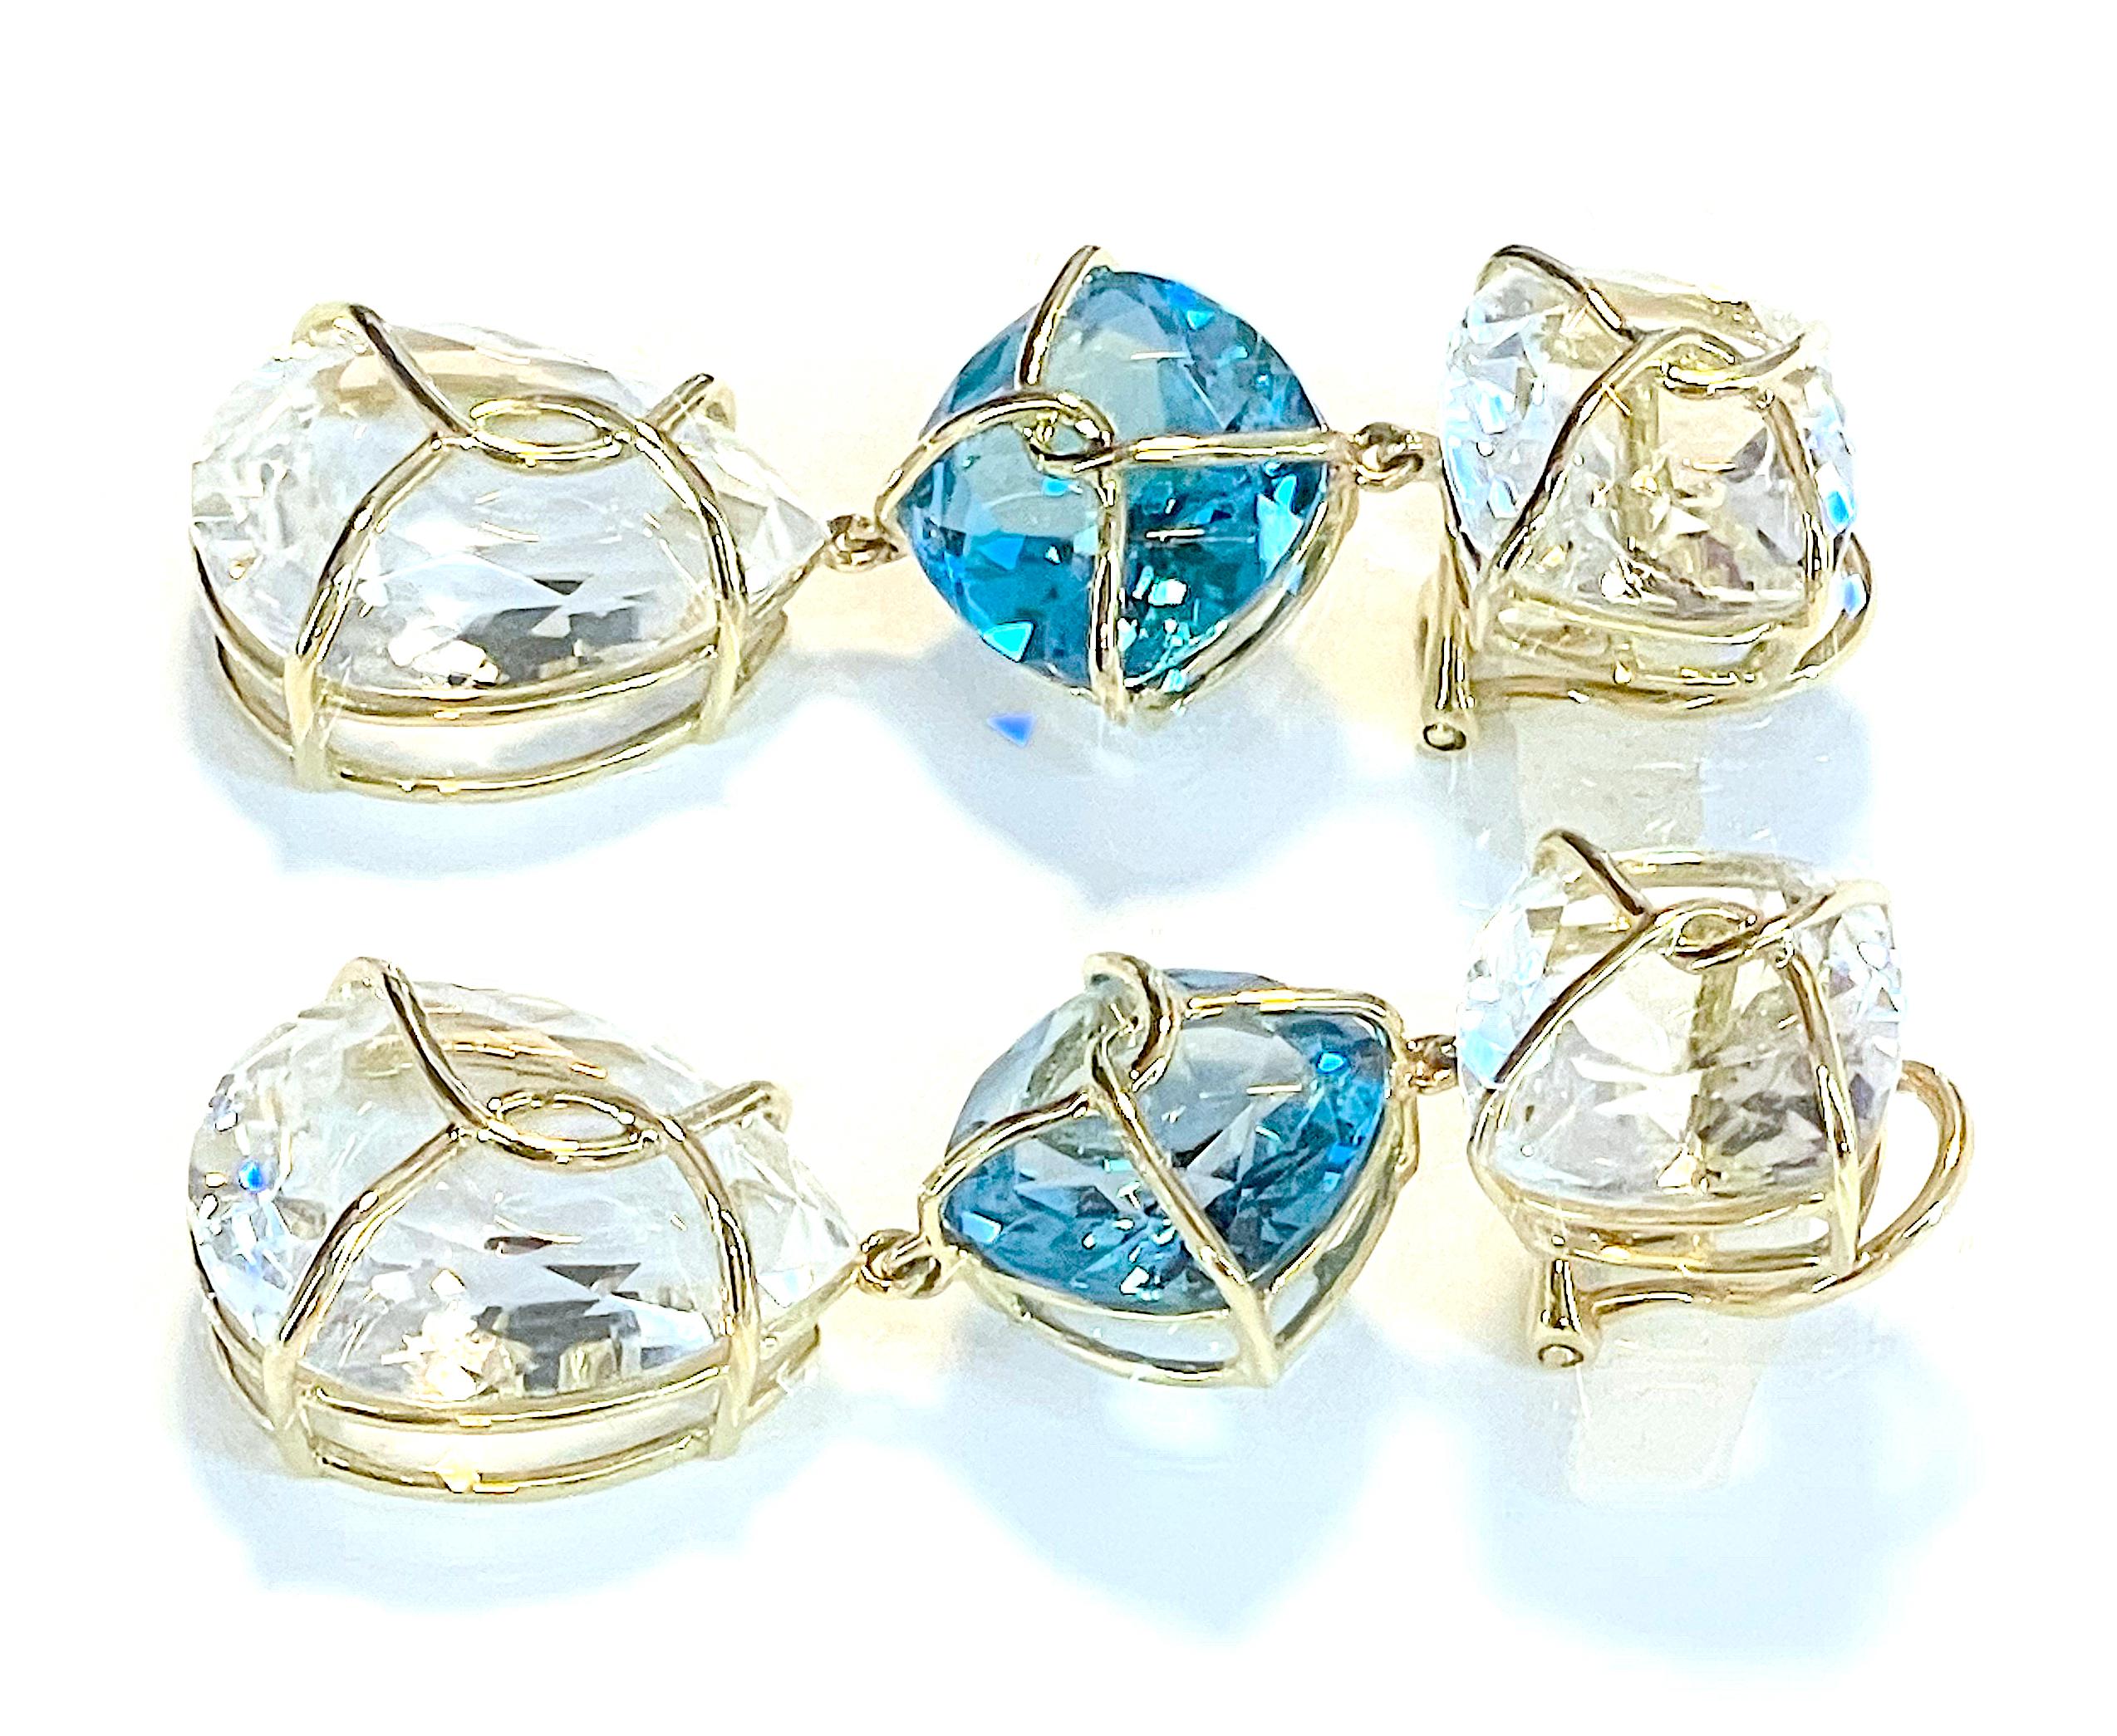 18kt Twisted Yellow Gold and Rock Crystal Drop Earring
 
This elegant earring measures two inches long. The top cushion is shaped Rock Crystal that measures half an inch wide. The middle cushion is shaped Blue Topaz also measures 1/2